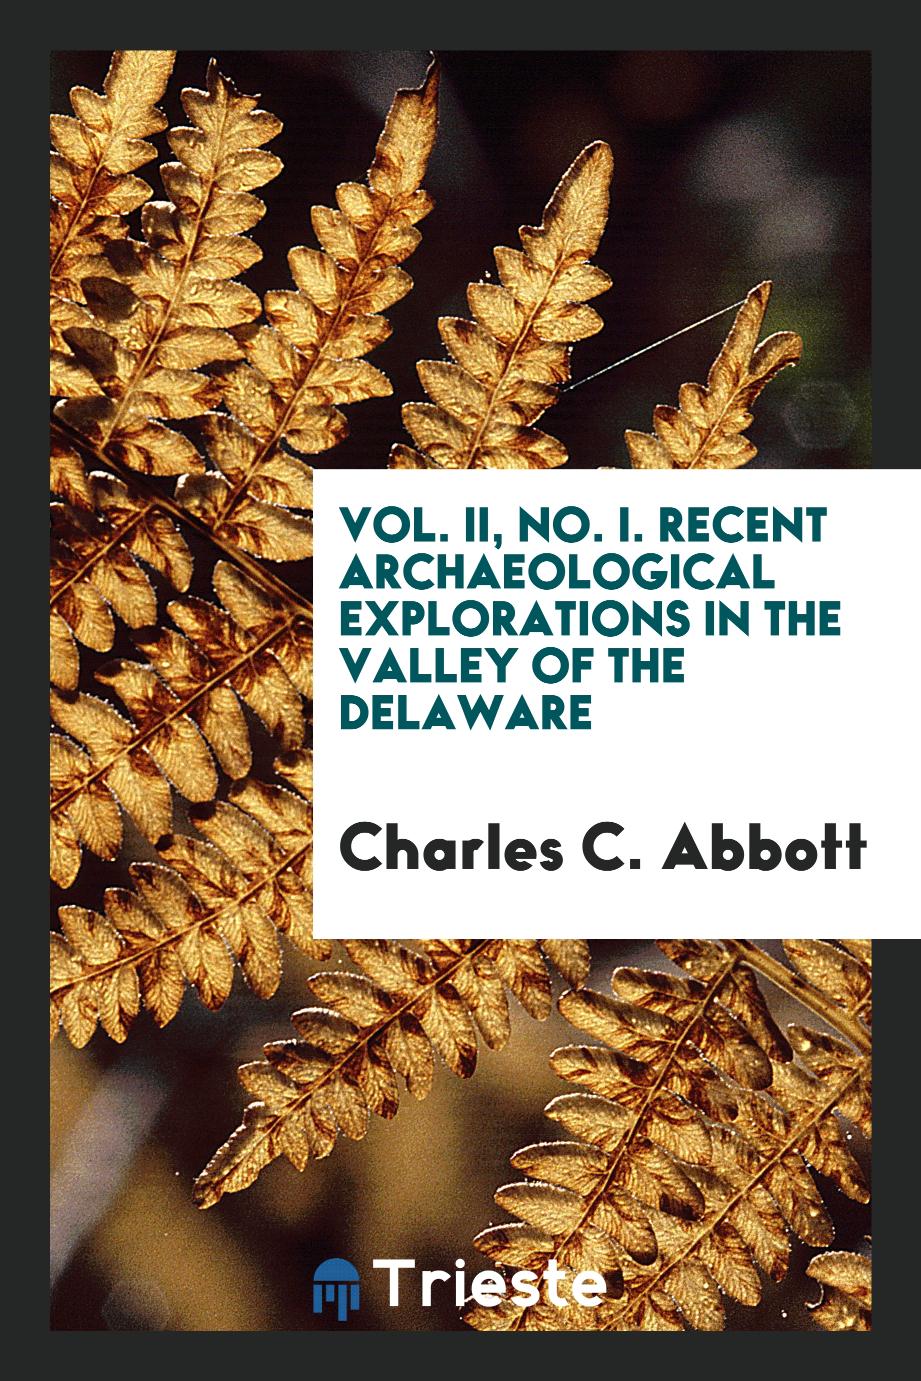 Vol. II, No. I. Recent Archaeological Explorations in the Valley of the Delaware